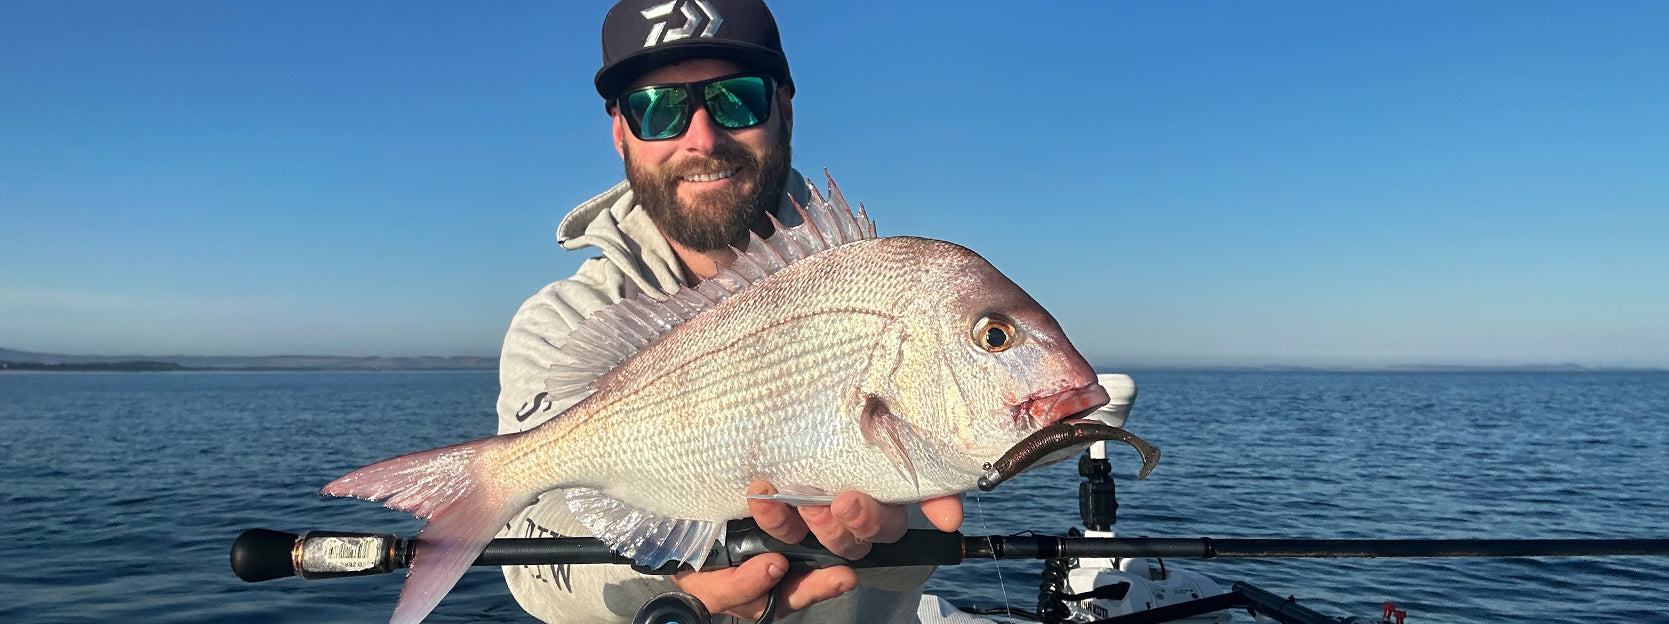 How to Catch Snapper in the Shallows